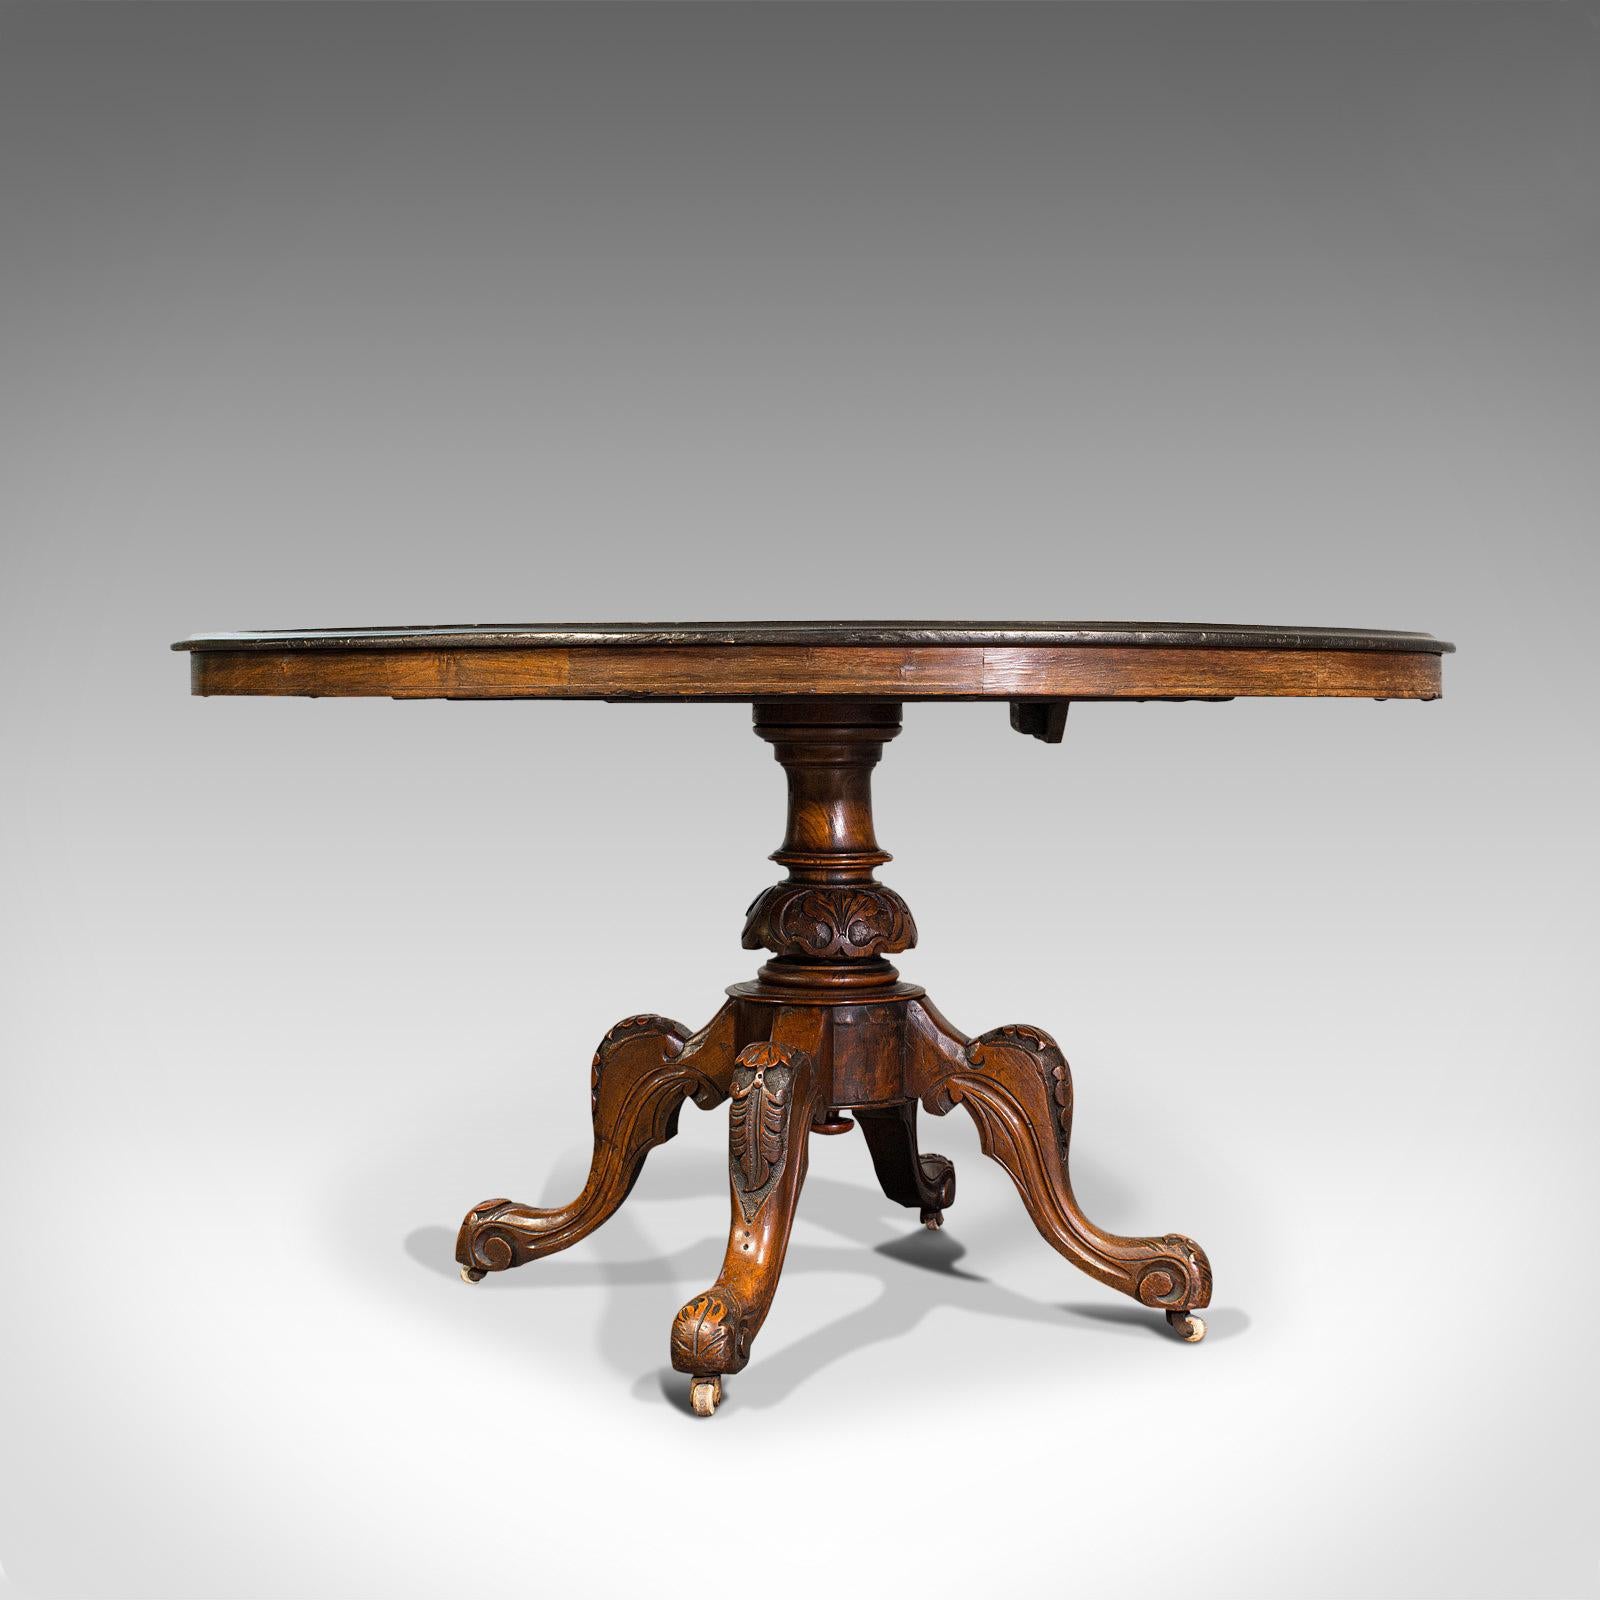 This is an antique breakfast table. An English, walnut over mahogany tilt-top oval table, dating to the Victorian period, circa 1870.

Beautifully appointed Victorian table
Displays a desirable aged patina - in good original order